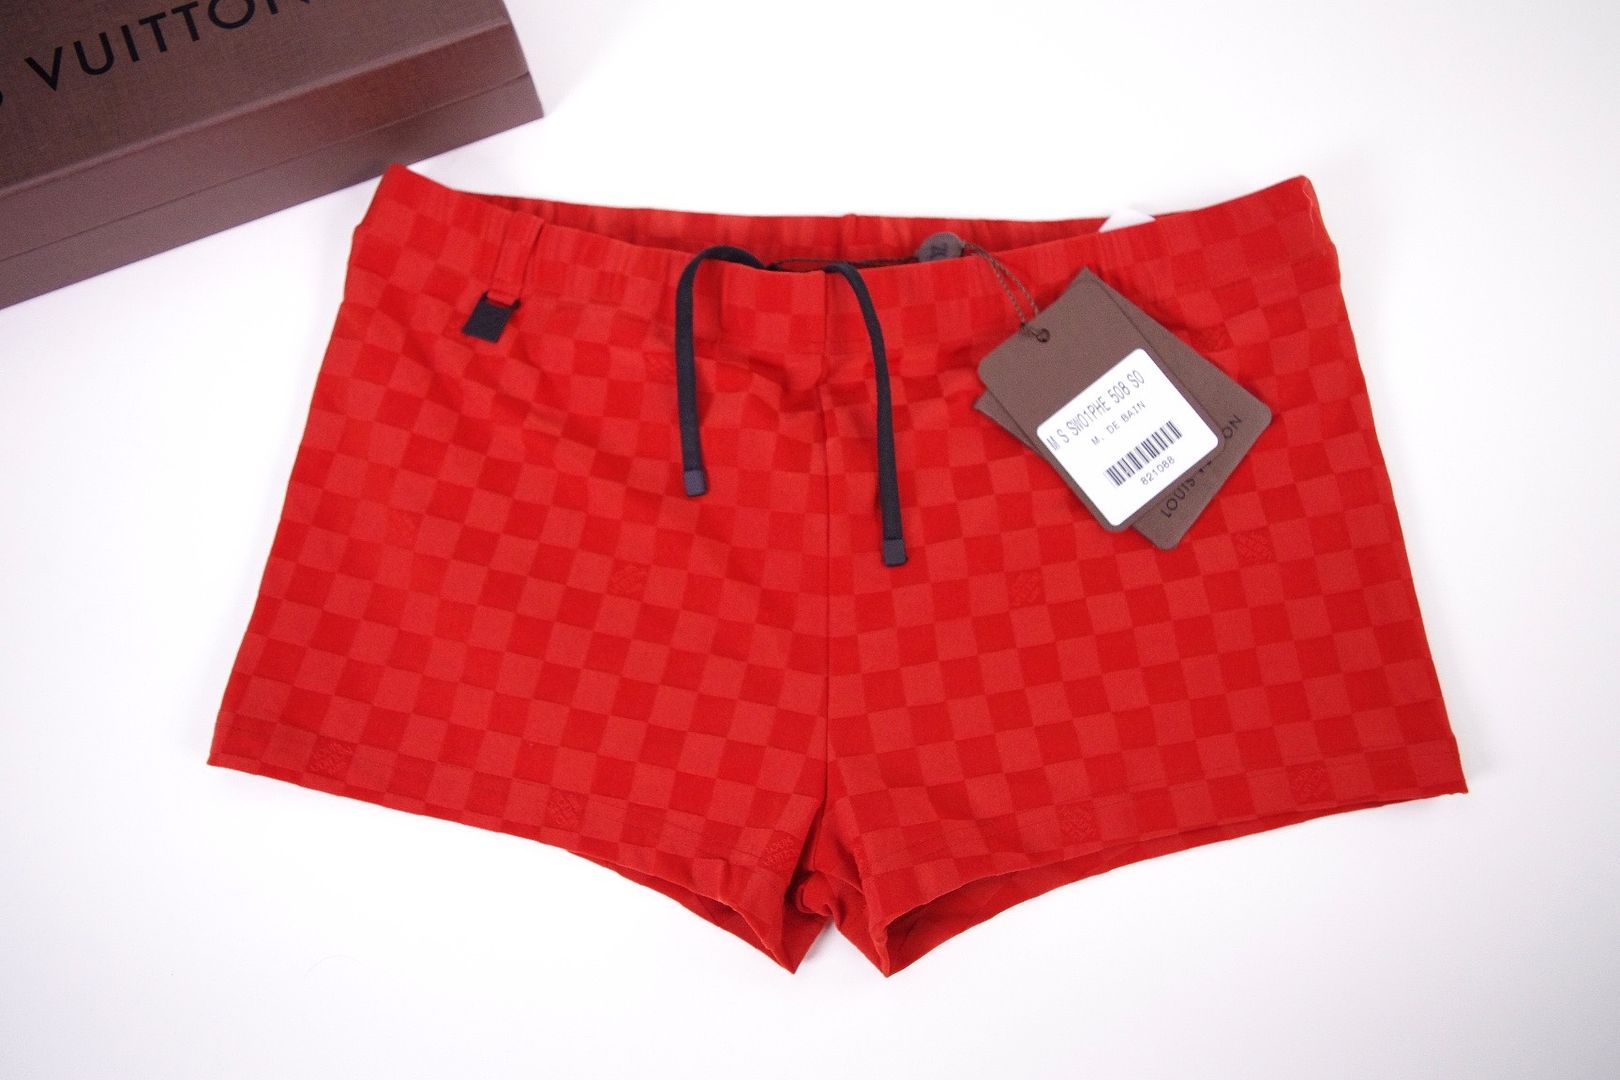 New LOUIS VUITTON Red DAMIER swim shorts trunks suit SMALL Lined LV logo w/ box | eBay